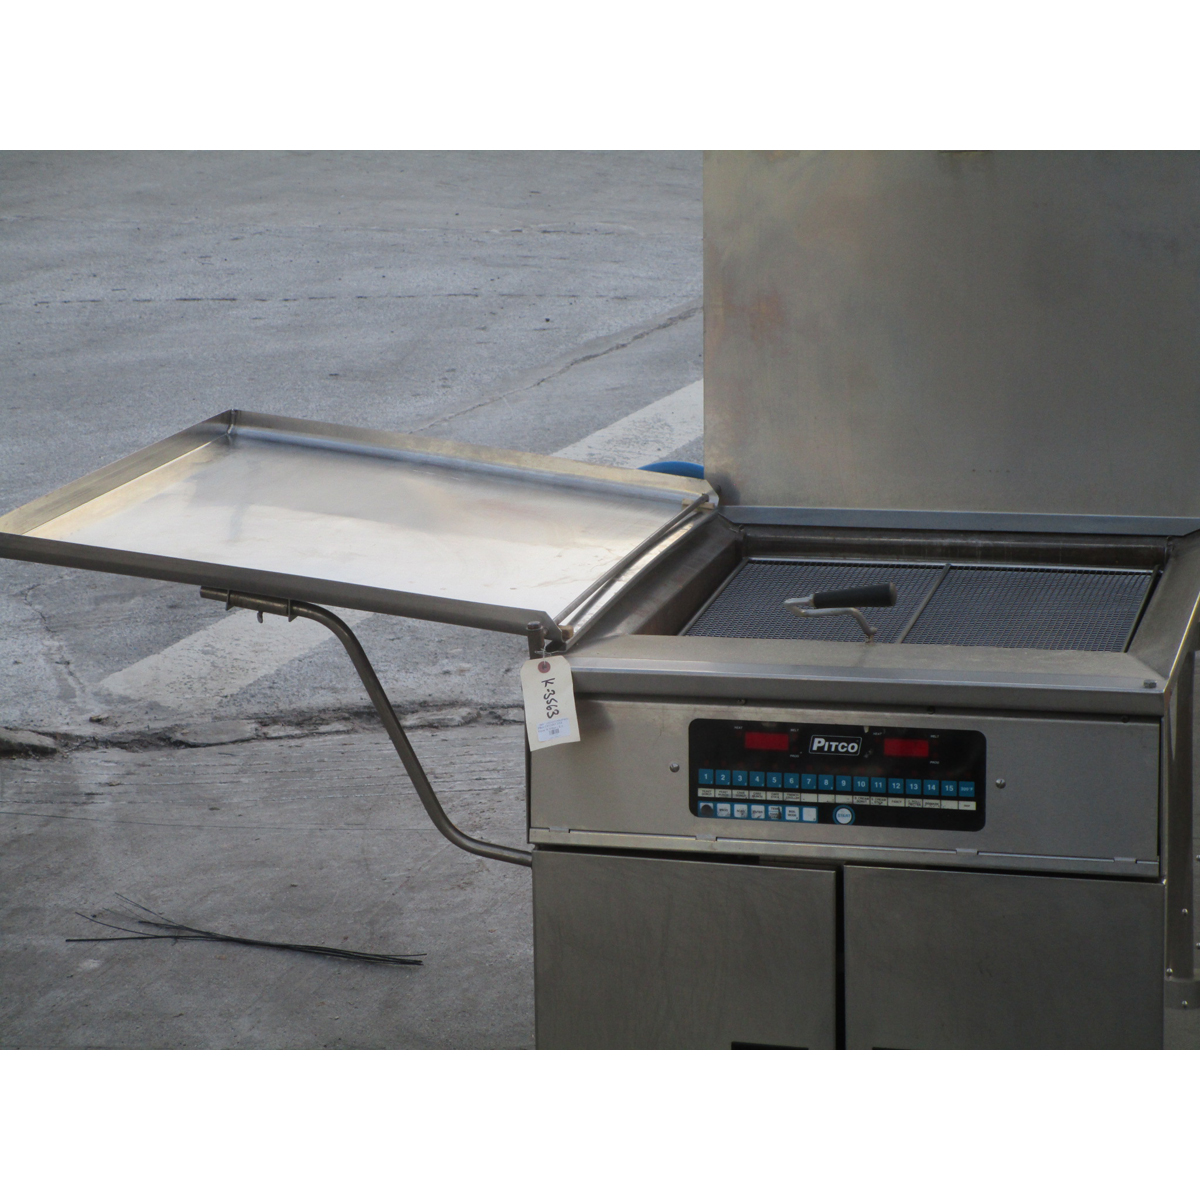 Pitco DD24RUFM Gas Donut Fryer with Filter, Very Good Condition image 3